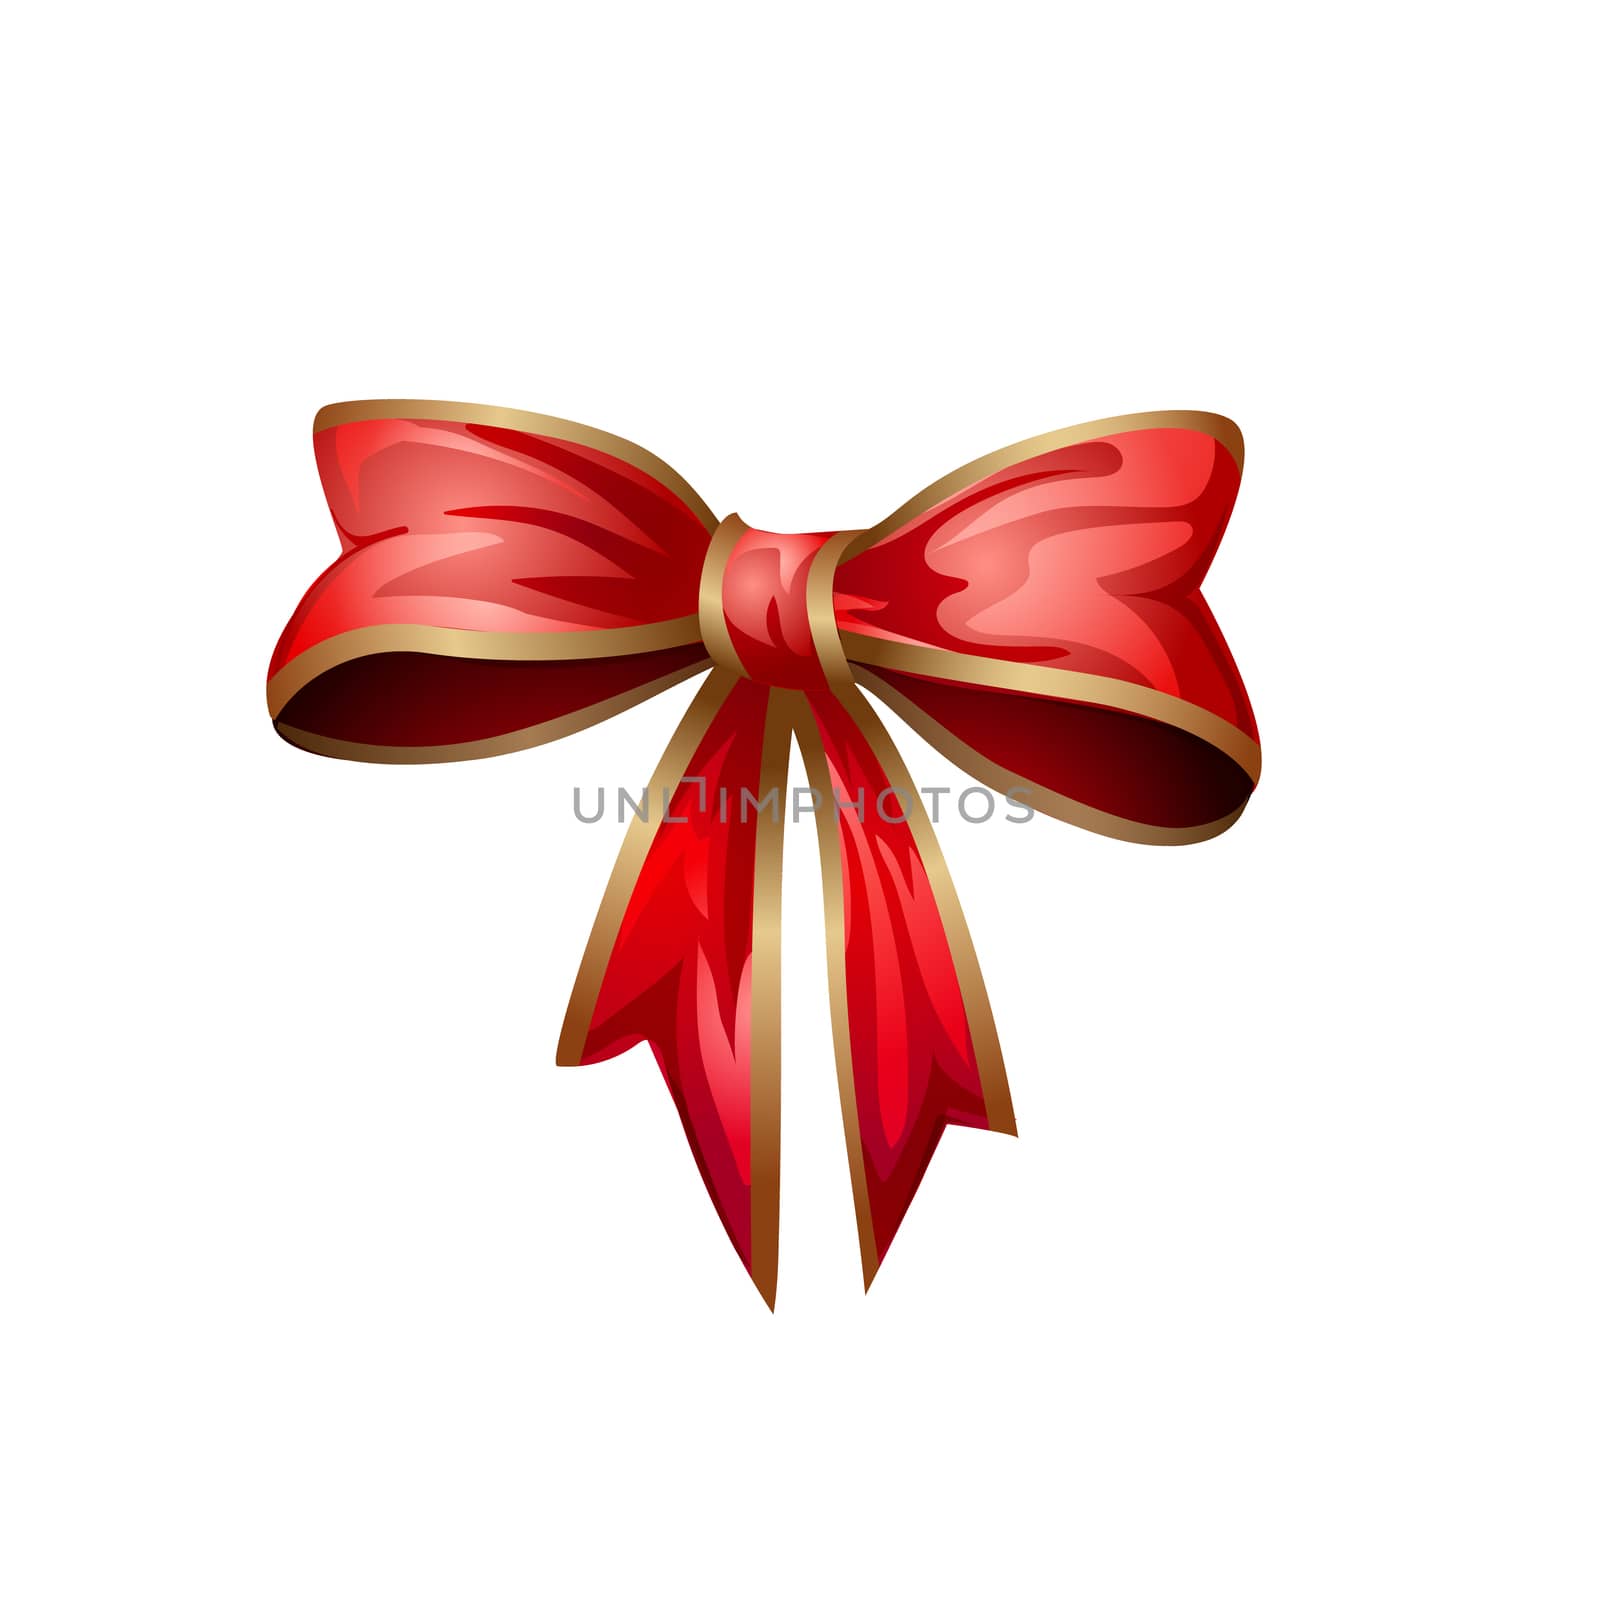 Cartoon style red bow isolated on white background by heliburcka